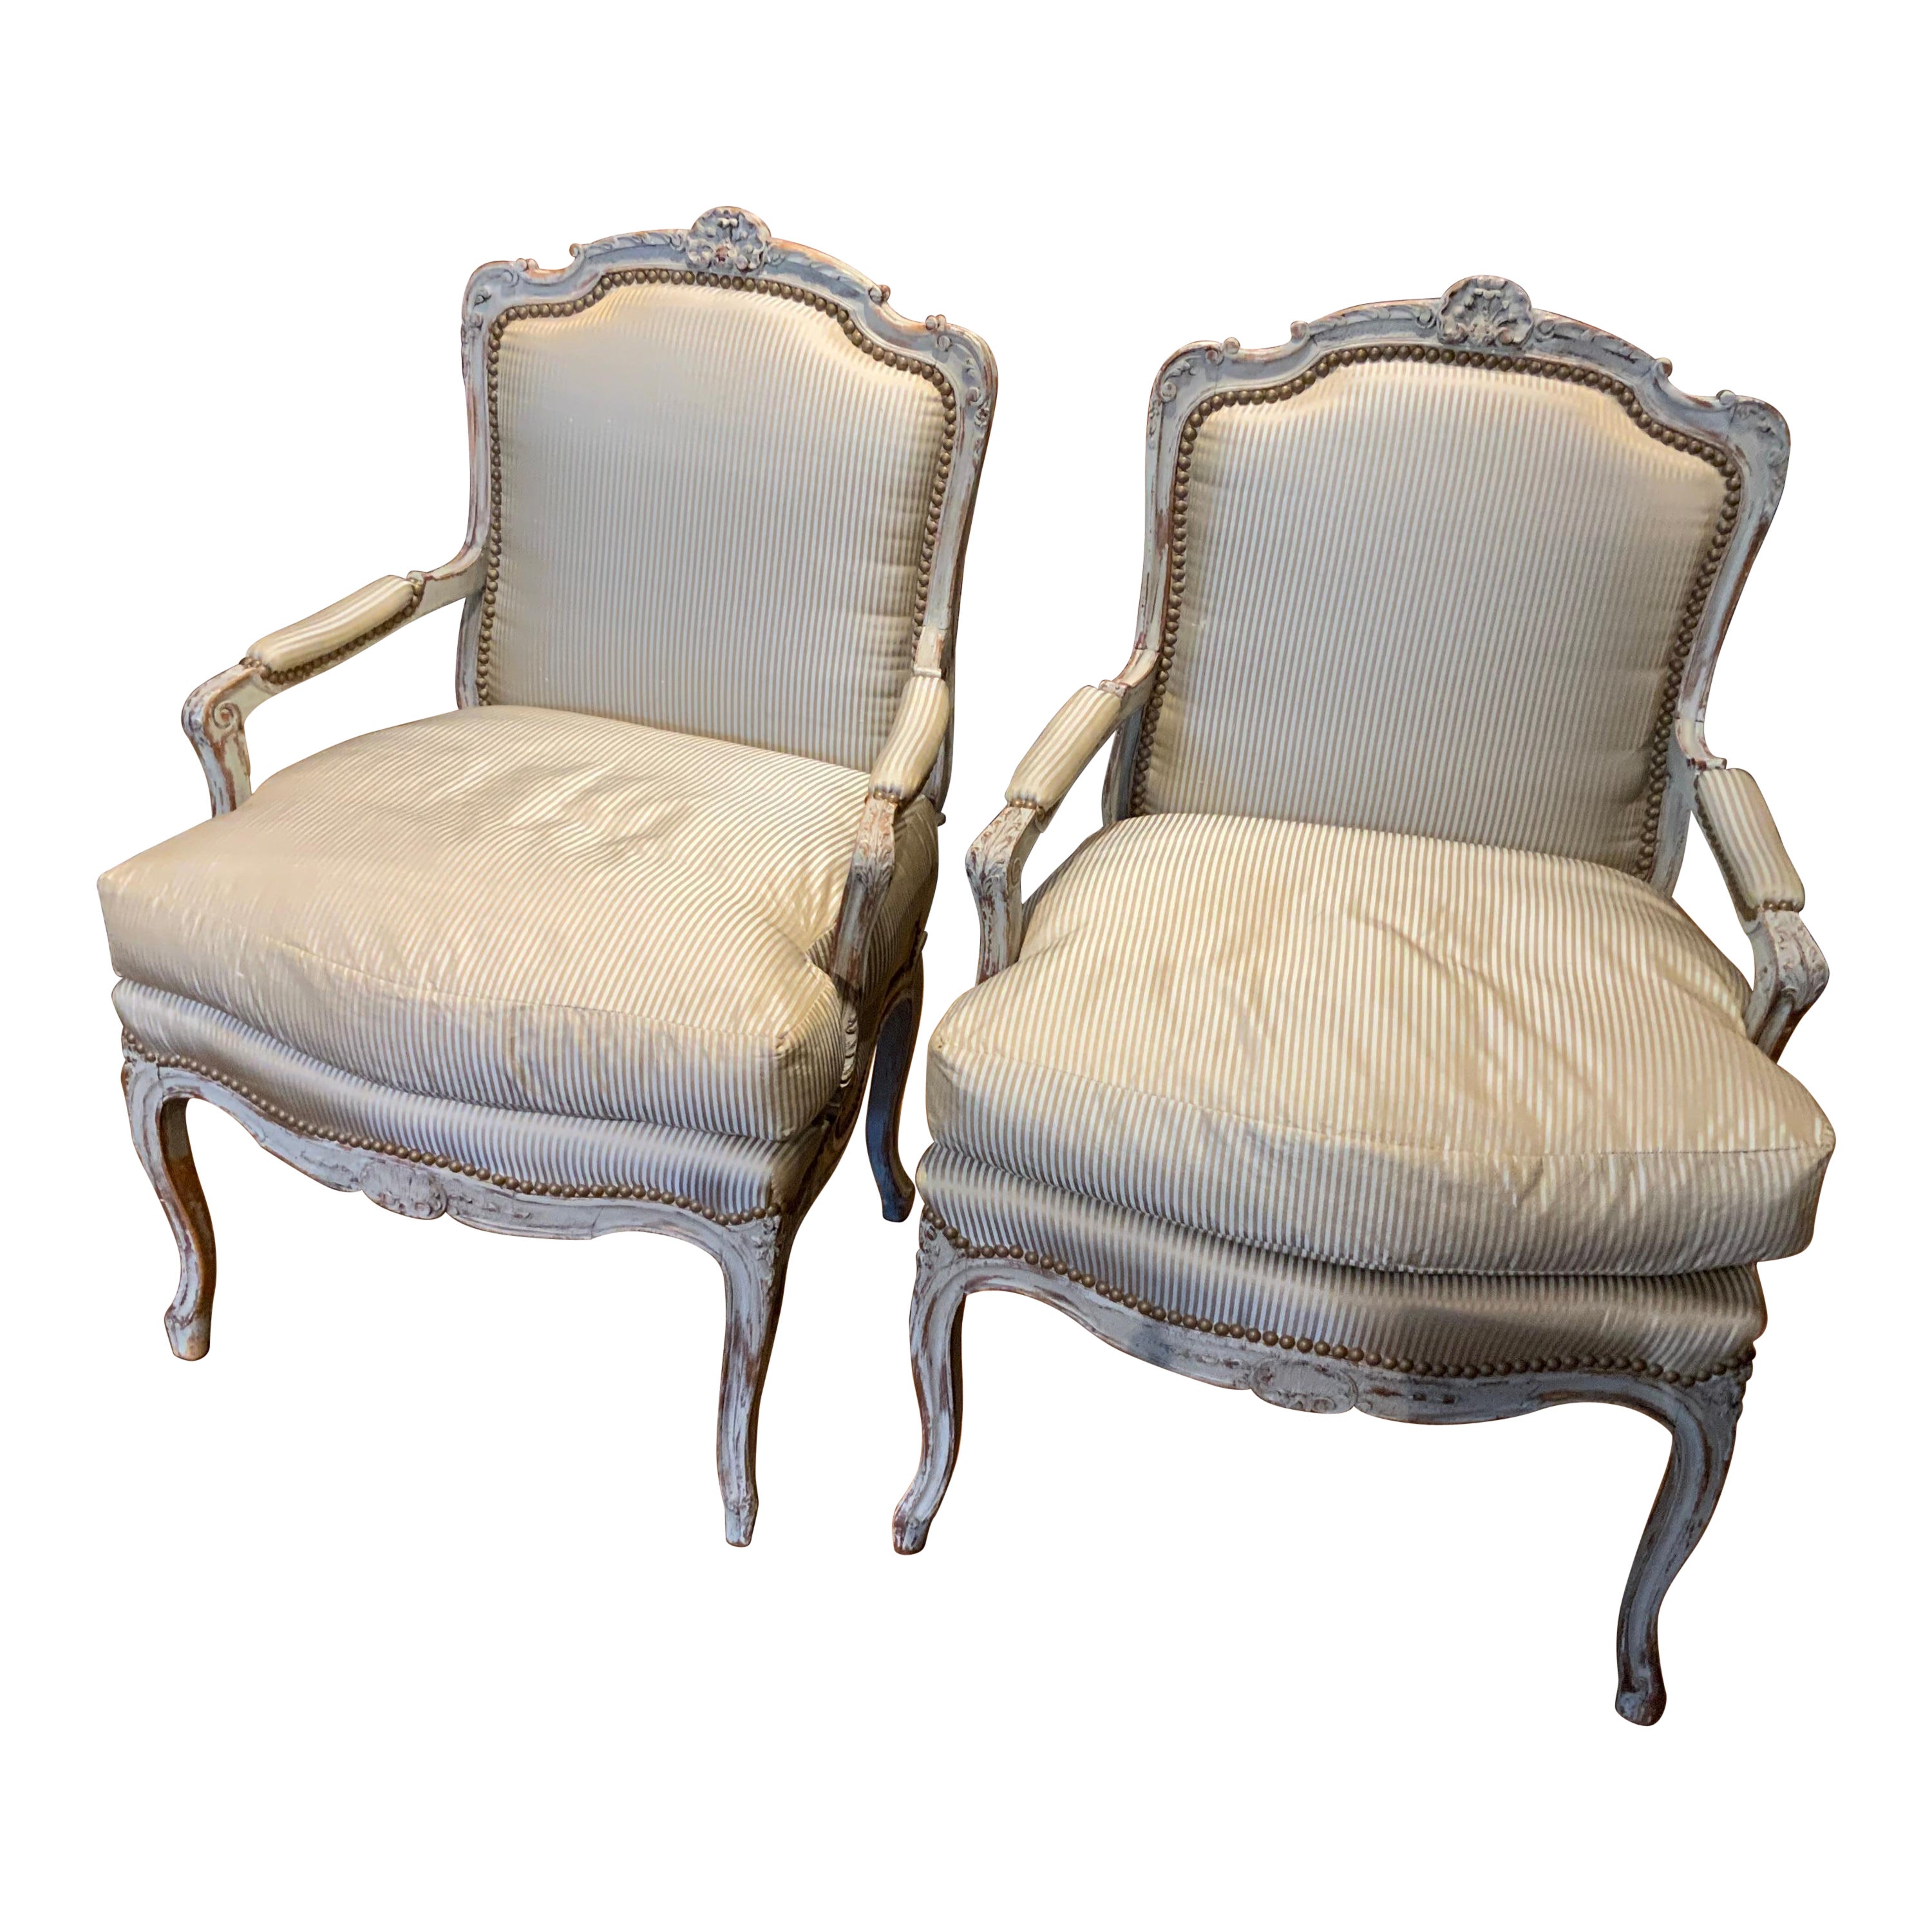 Pair of Louis XV Style Arm Chairs/Fauteuils in Painted Finish with Silk Fabric For Sale